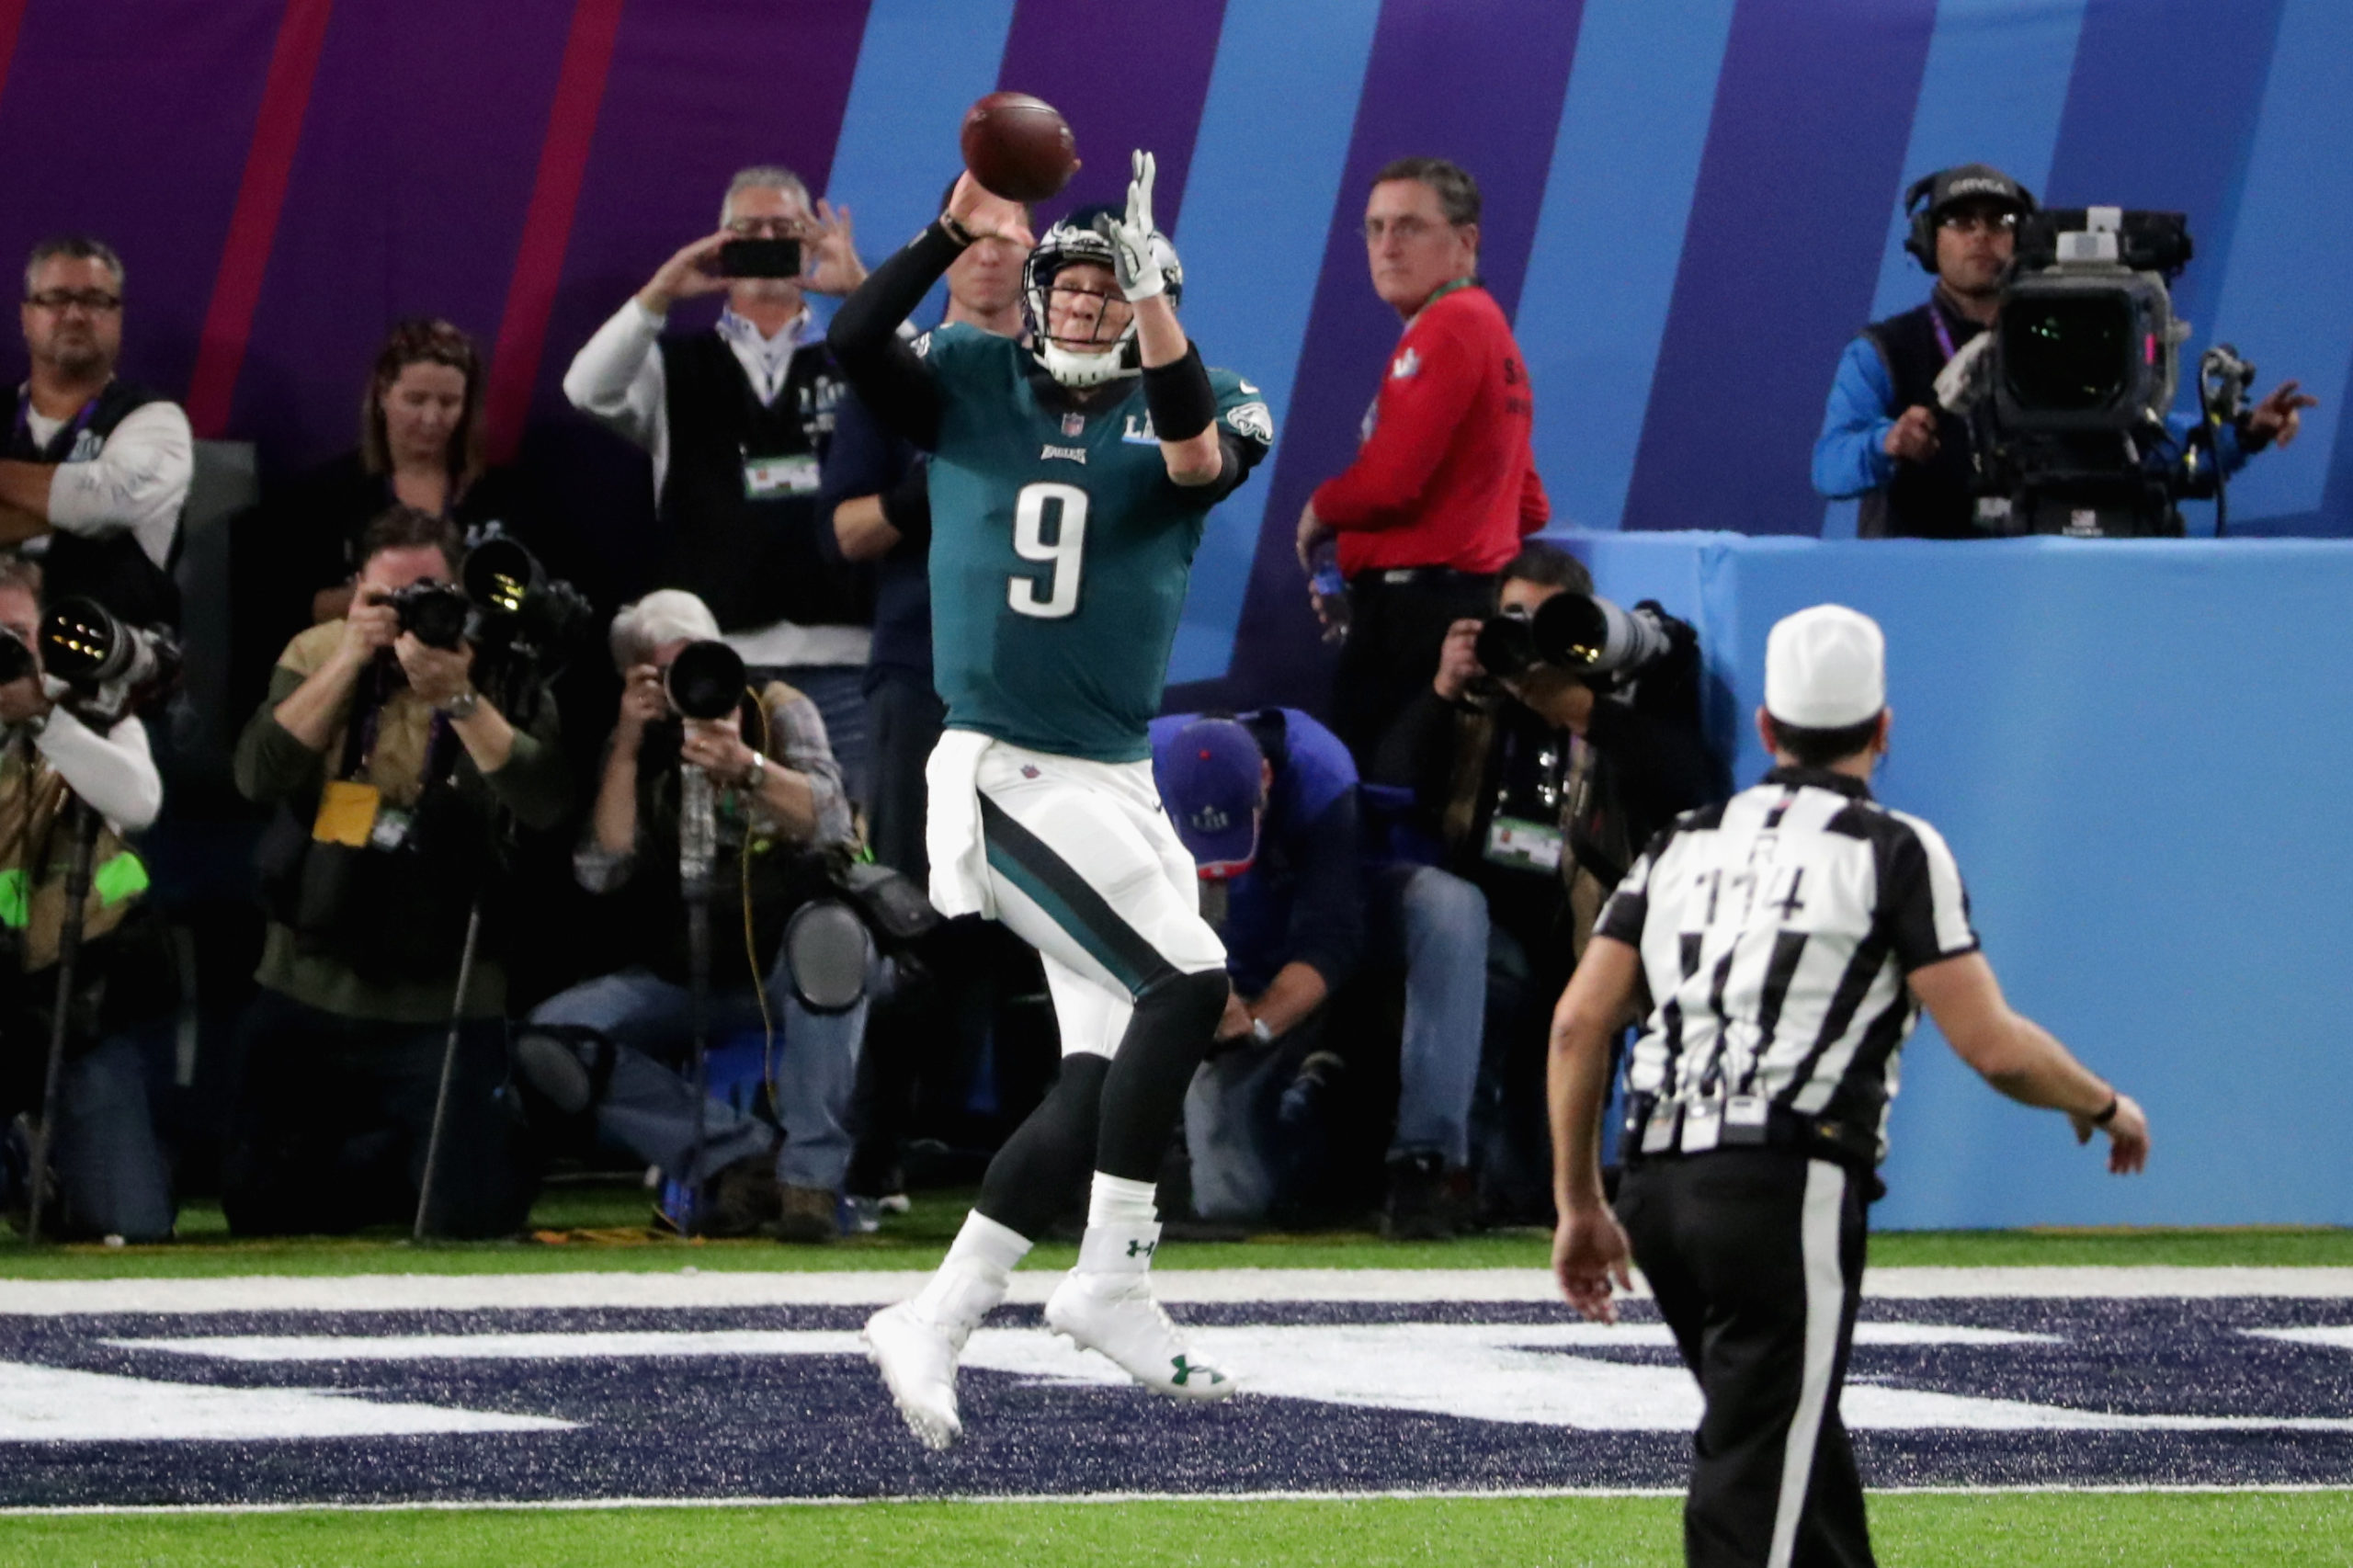 MINNEAPOLIS, MN - FEBRUARY 04: Nick Foles #9 of the Philadelphia Eagles catches a second quarter touchdown reception from teammate Trey Burton against the New England Patriots in Super Bowl LII at U.S. Bank Stadium on February 4, 2018 in Minneapolis, Minnesota. Streeter Lecka/Getty Images